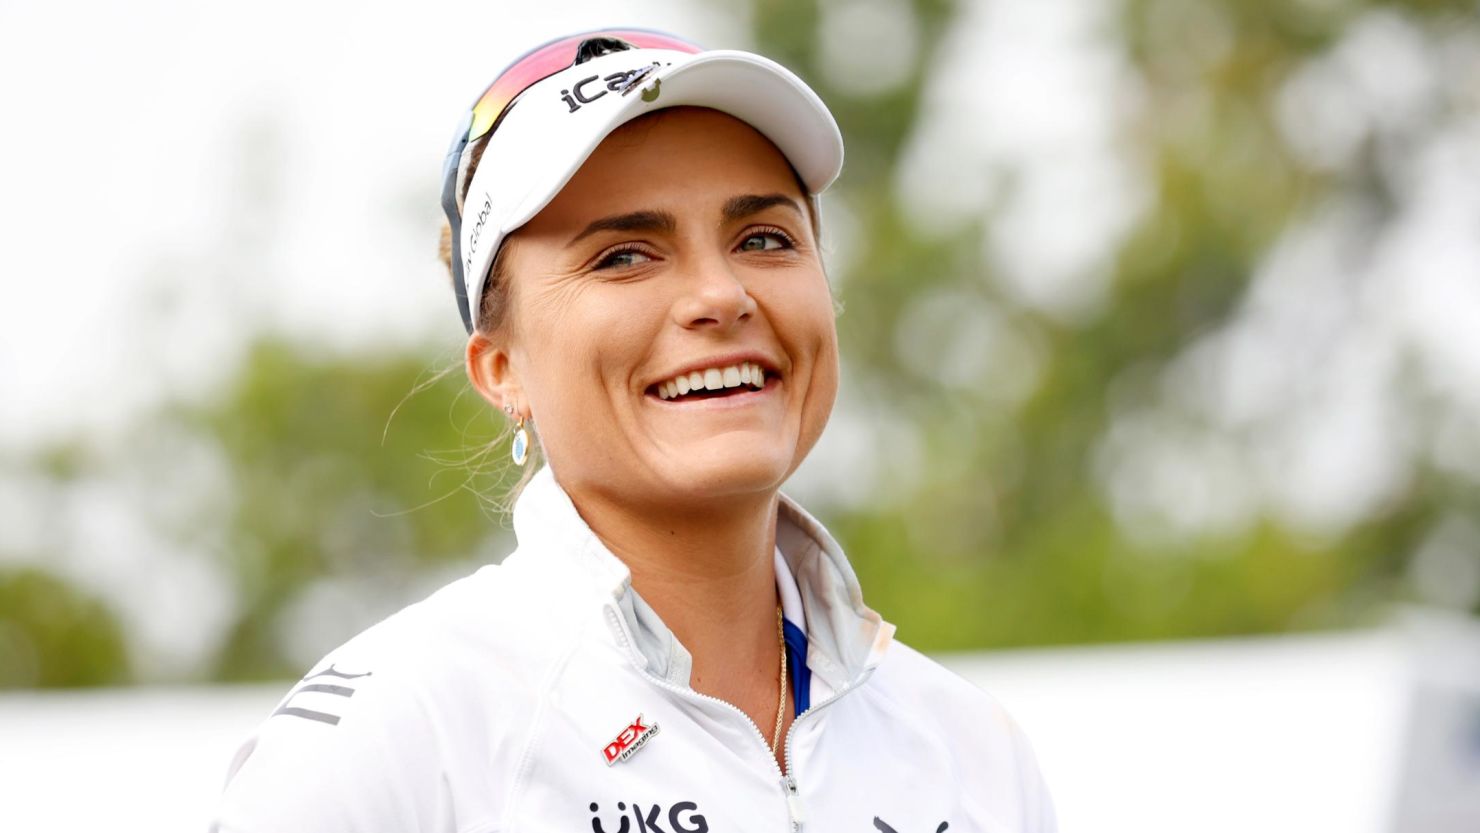 CINCINNATI, OH - SEPTEMBER 10: LPGA player Lexi Thompson smiles as she walks the first hole during the final round of the Kroger Queen City Championship at the Kenwood Country Club in Cincinnati, Ohio. (Photo by Brian Spurlock/Icon Sportswire) (Icon Sportswire via AP Images)